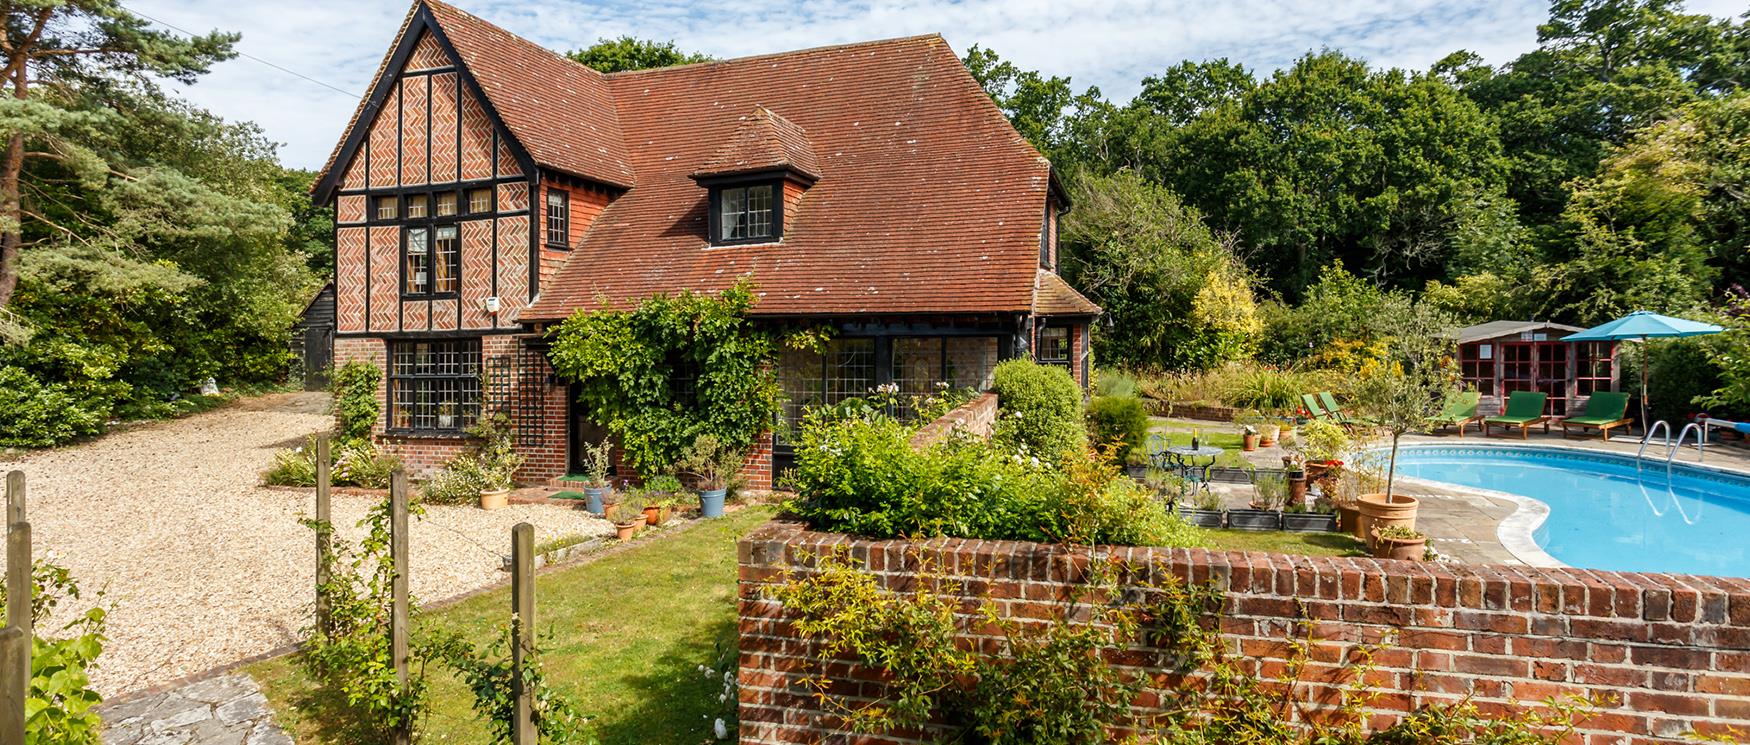 Self Catering Accommodation in Hampshire